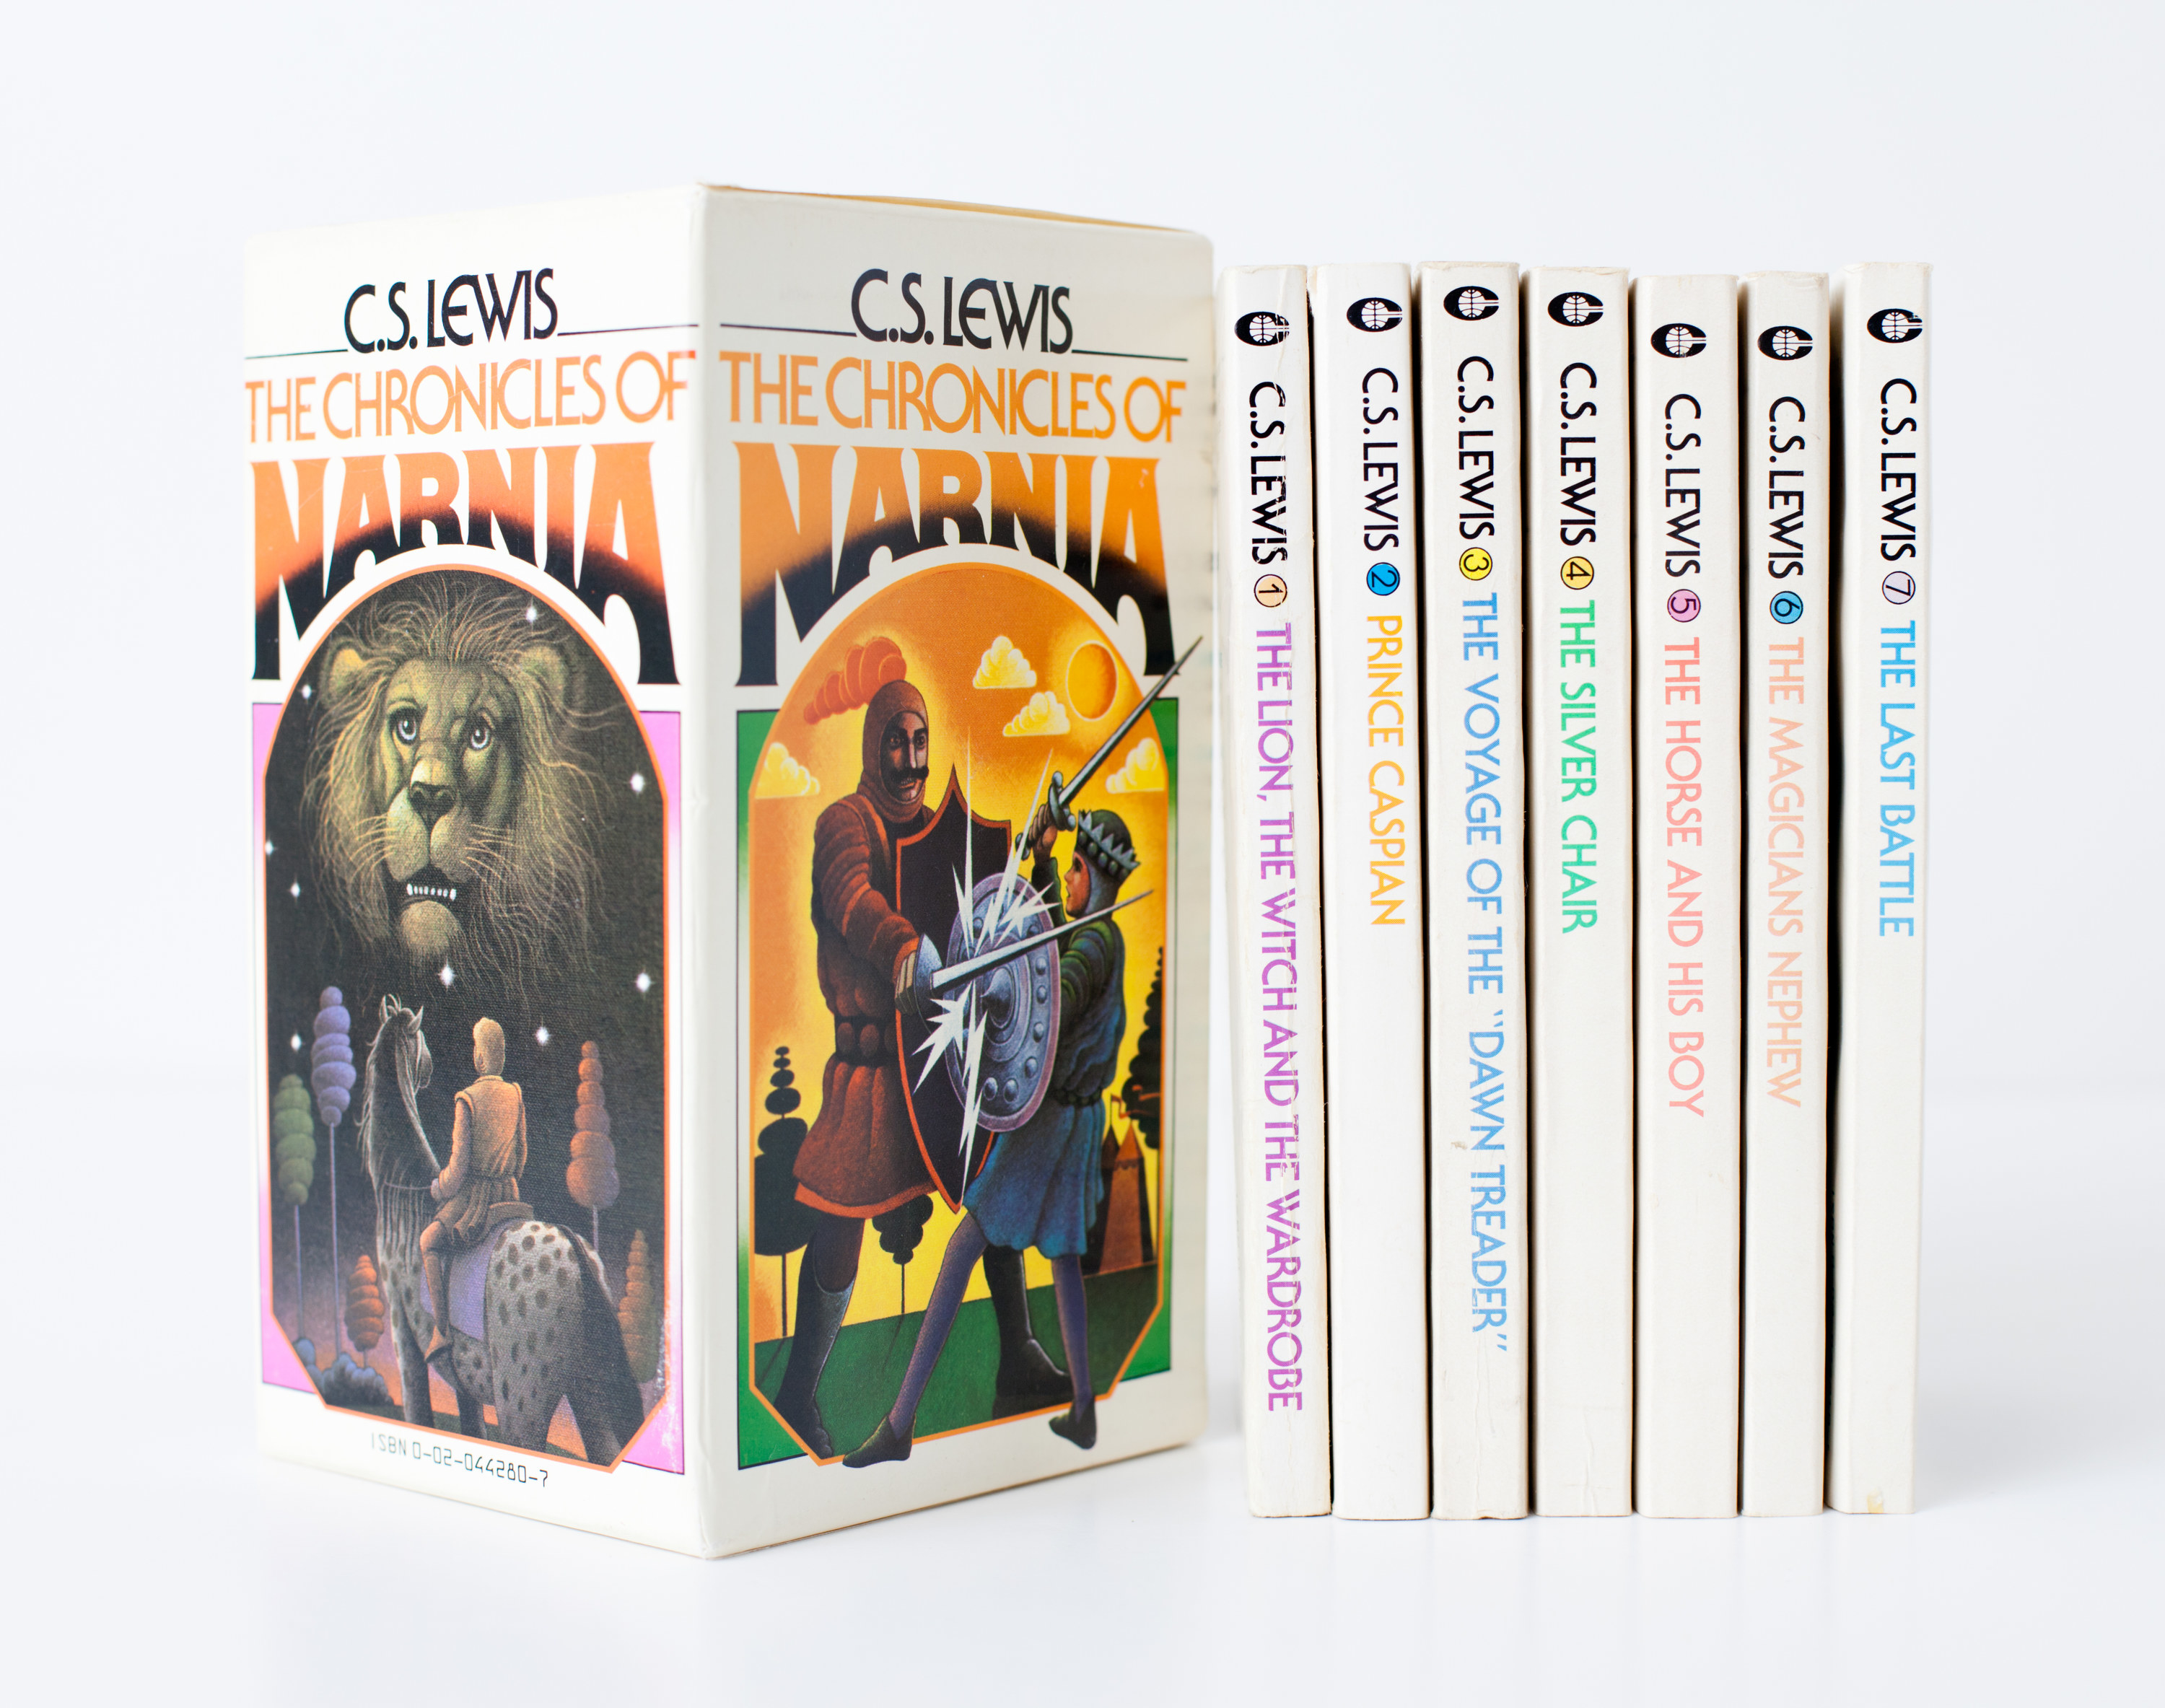 A box set of the Narnia book series